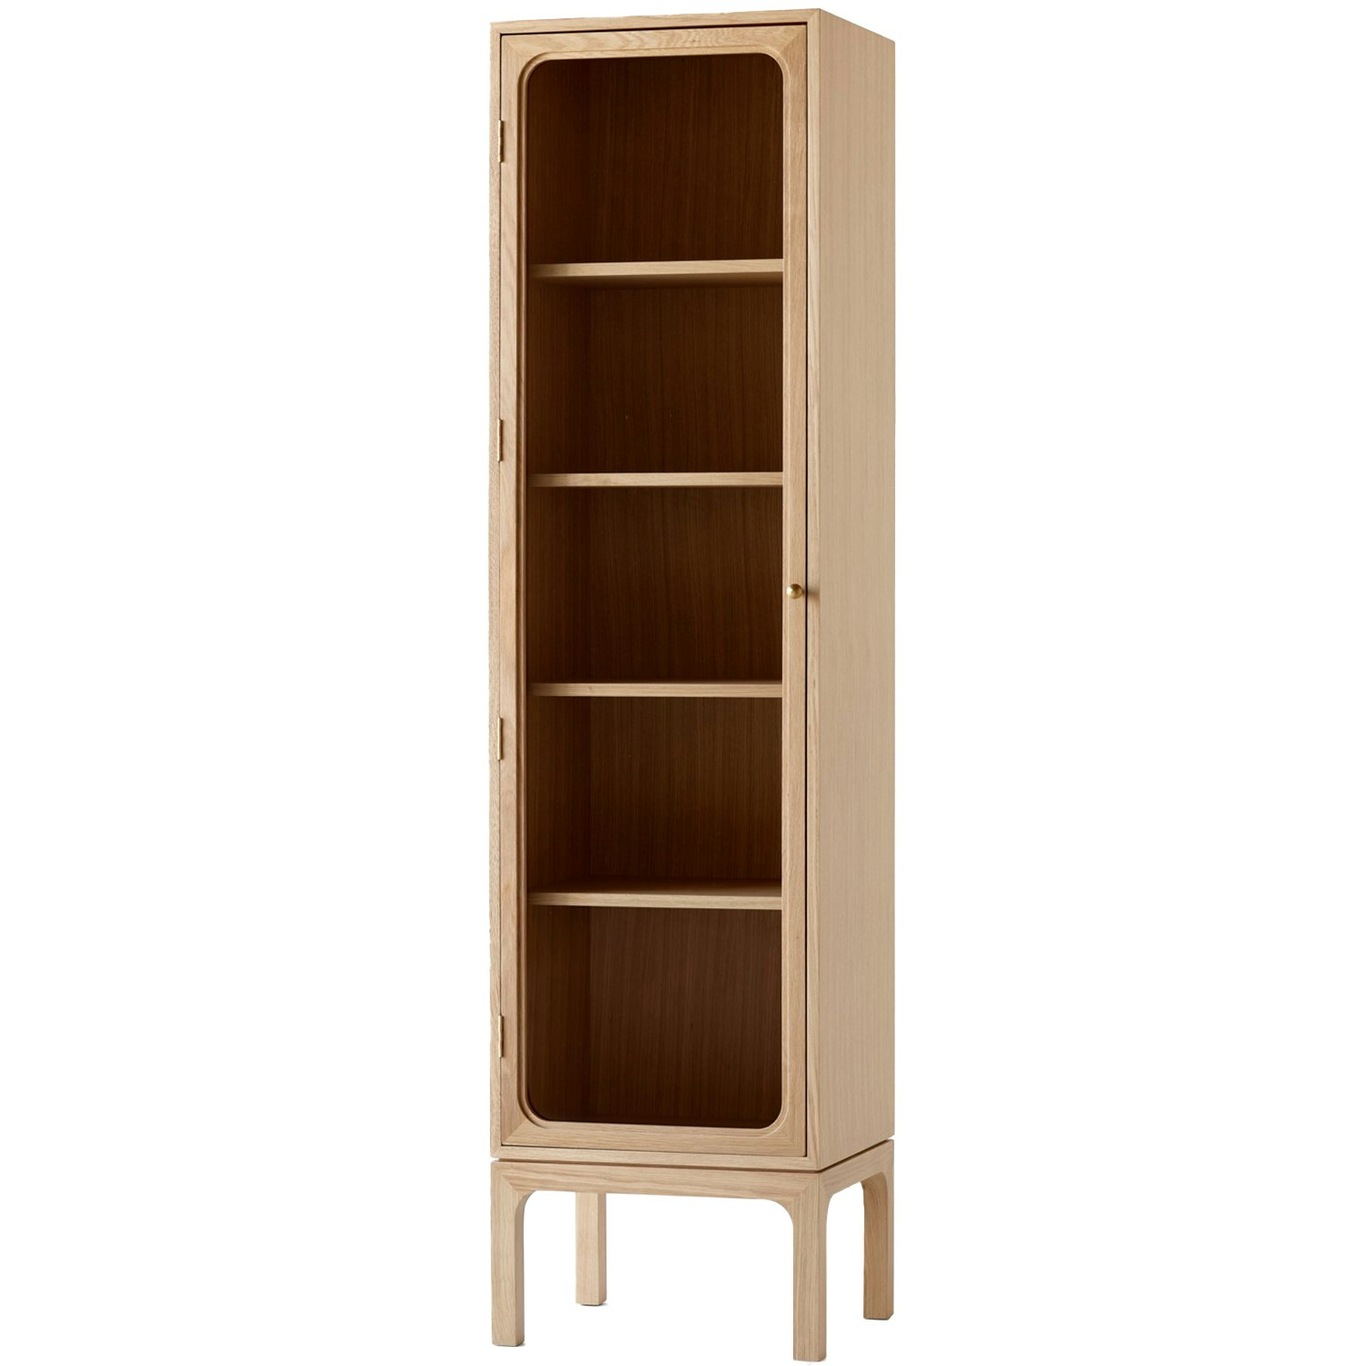 Trace SC87 Cabinet, Clear Lacquered Oak